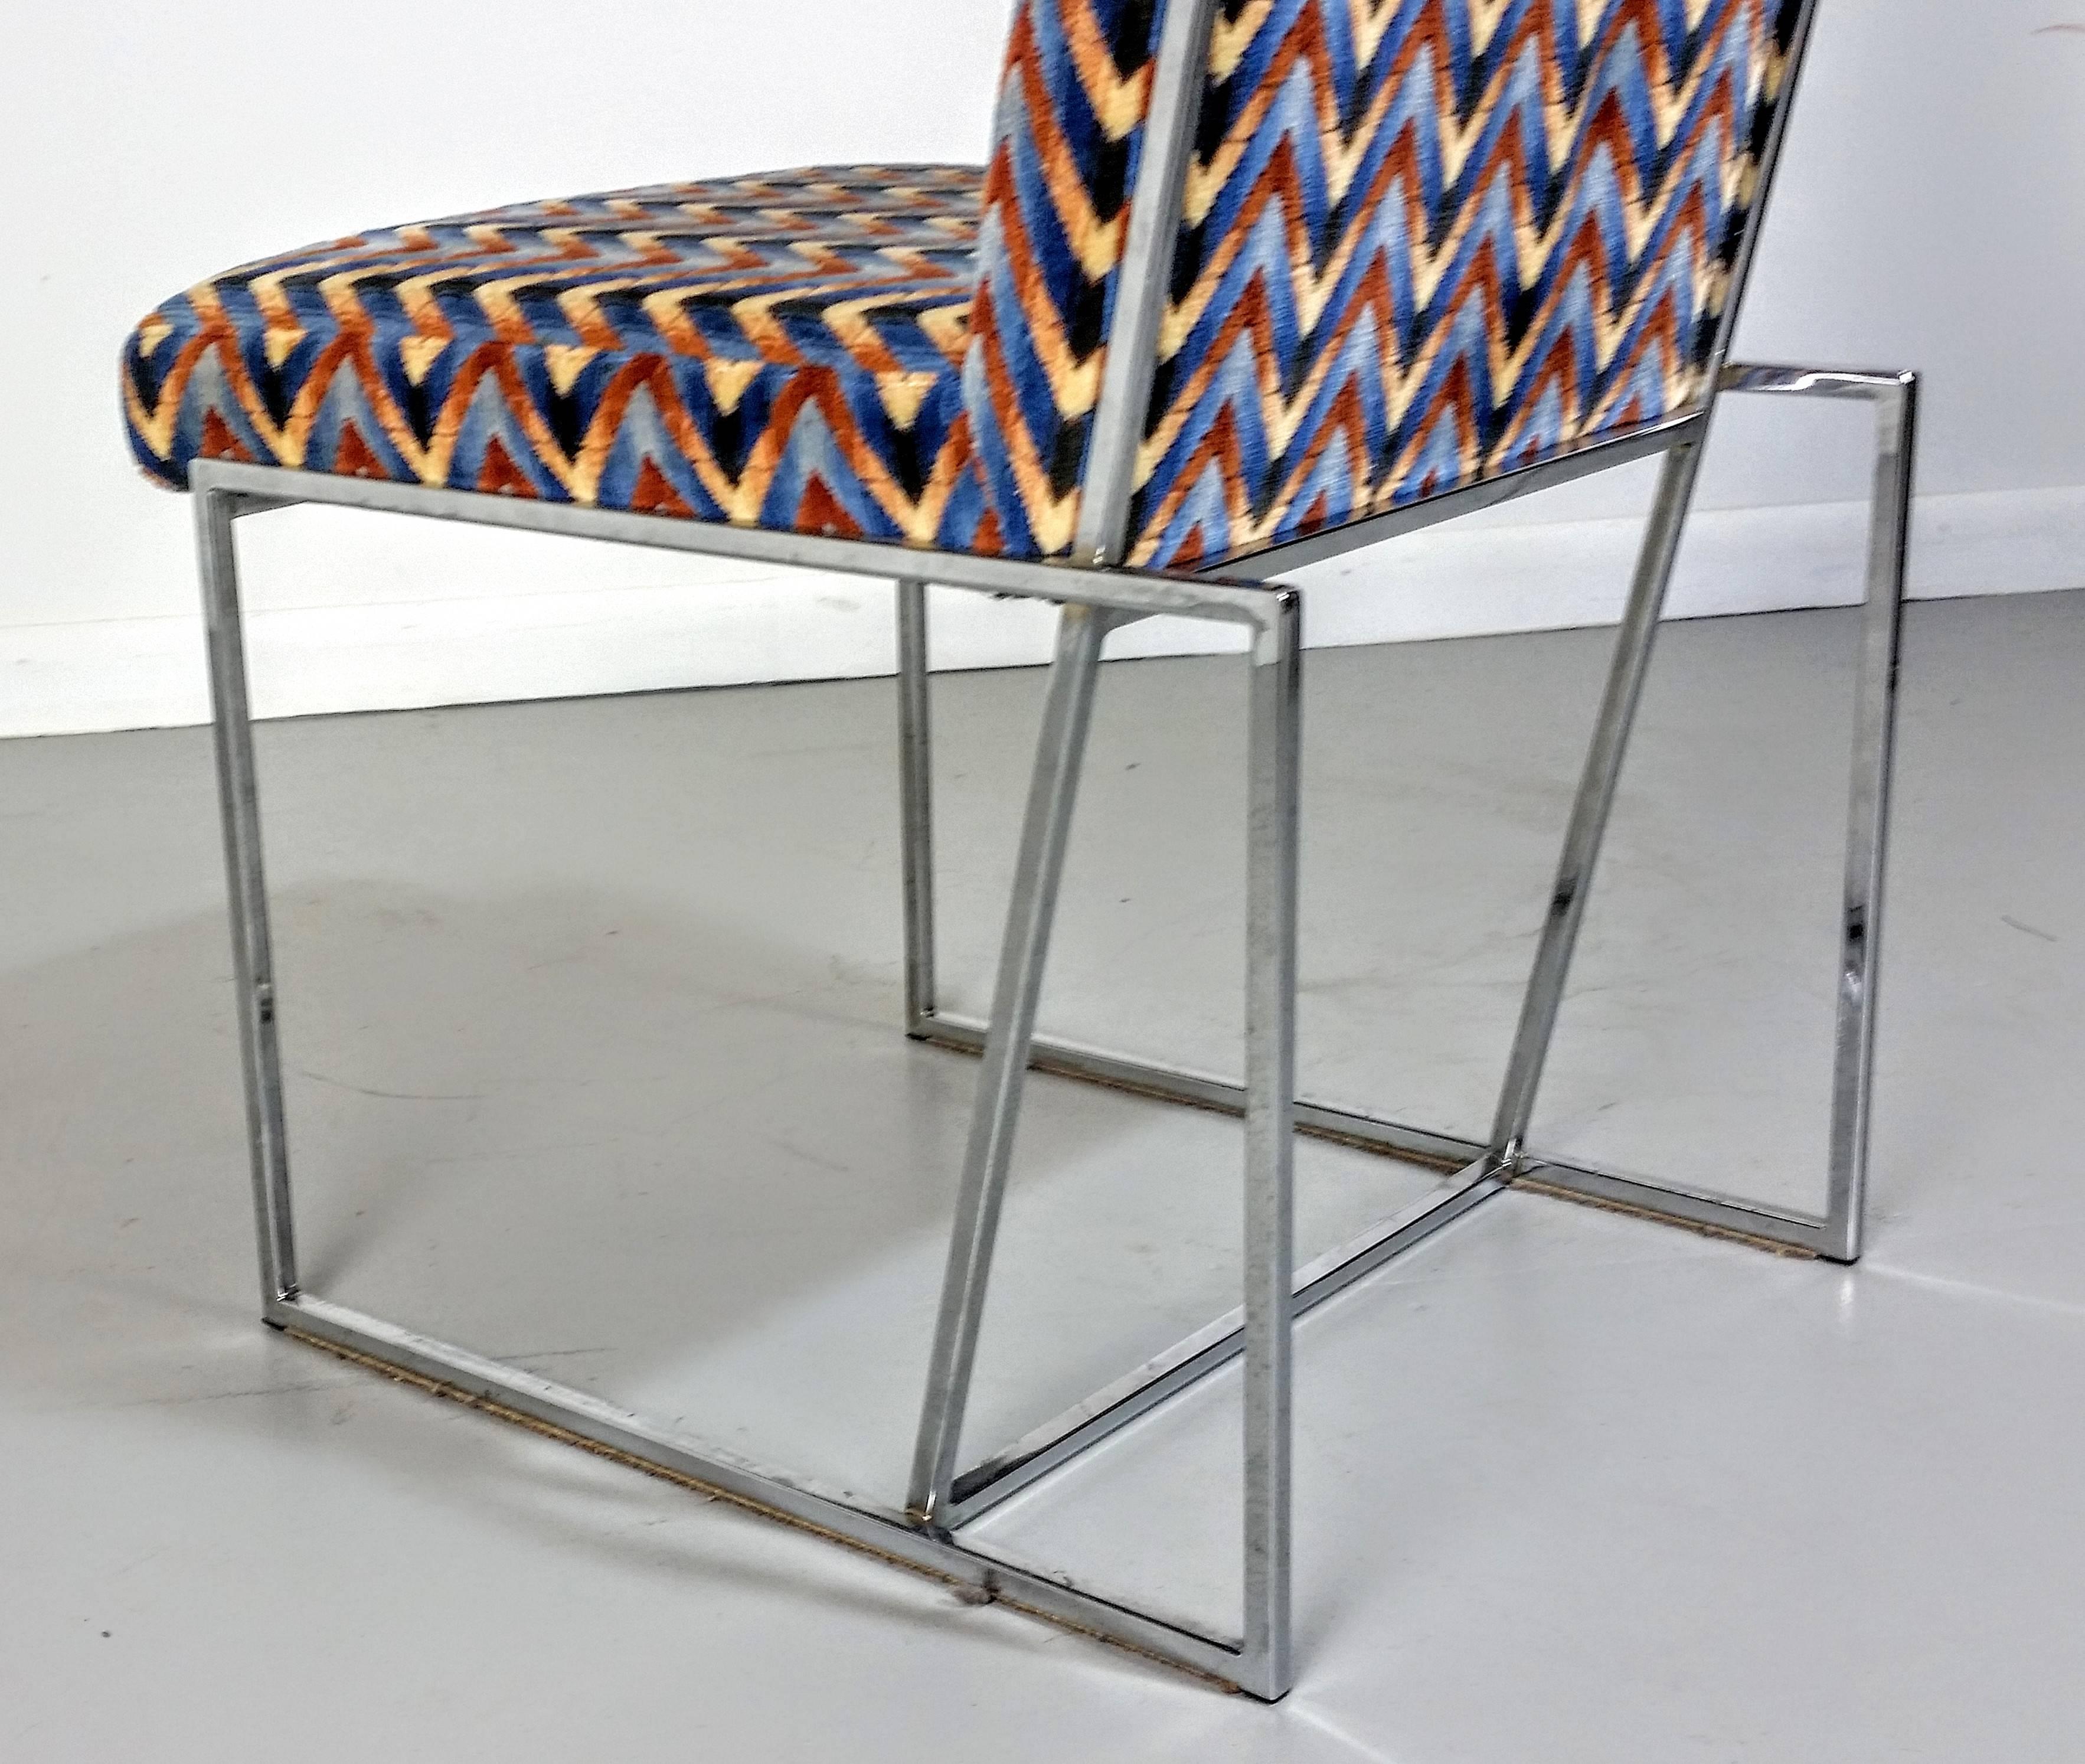 Rare architectural chrome dining chairs in the style of Milo Baughman, 1970s. Excellent vintage condition. Chrome is beautiful. Ready for reupholstery!

See this item in our private NYC showroom! Refine Limited is located in the heart of Chelsea at